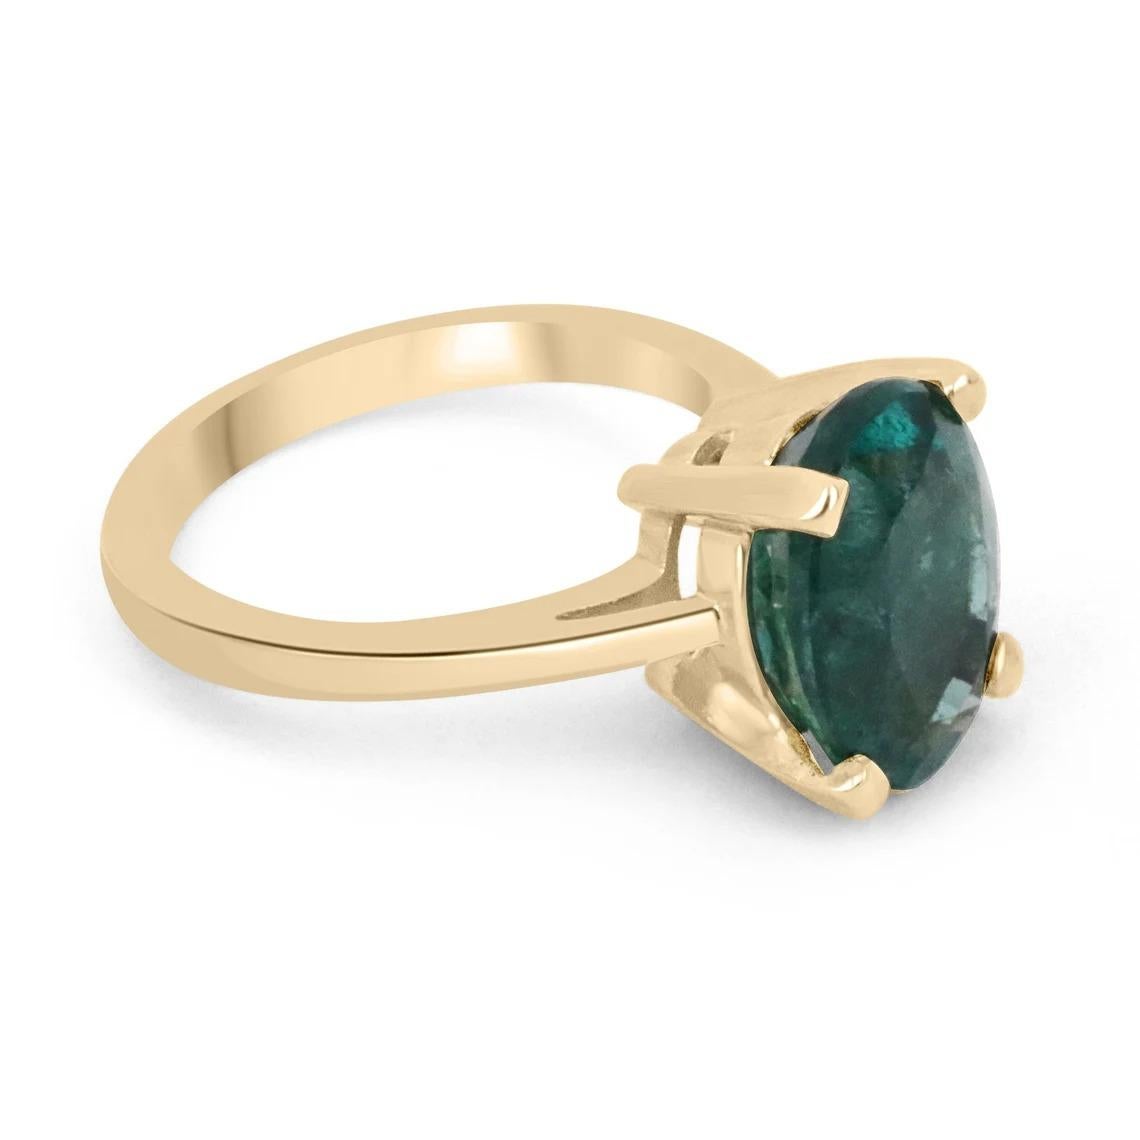 A gorgeous solitaire emerald ring. This beautiful piece showcases a large 3.31-carat, natural, Zambian oval cut emerald. The gemstone has a lustrous, dark forest green color with a deep bluish-green hue. Set in a simple, four-prong 14K yellow gold